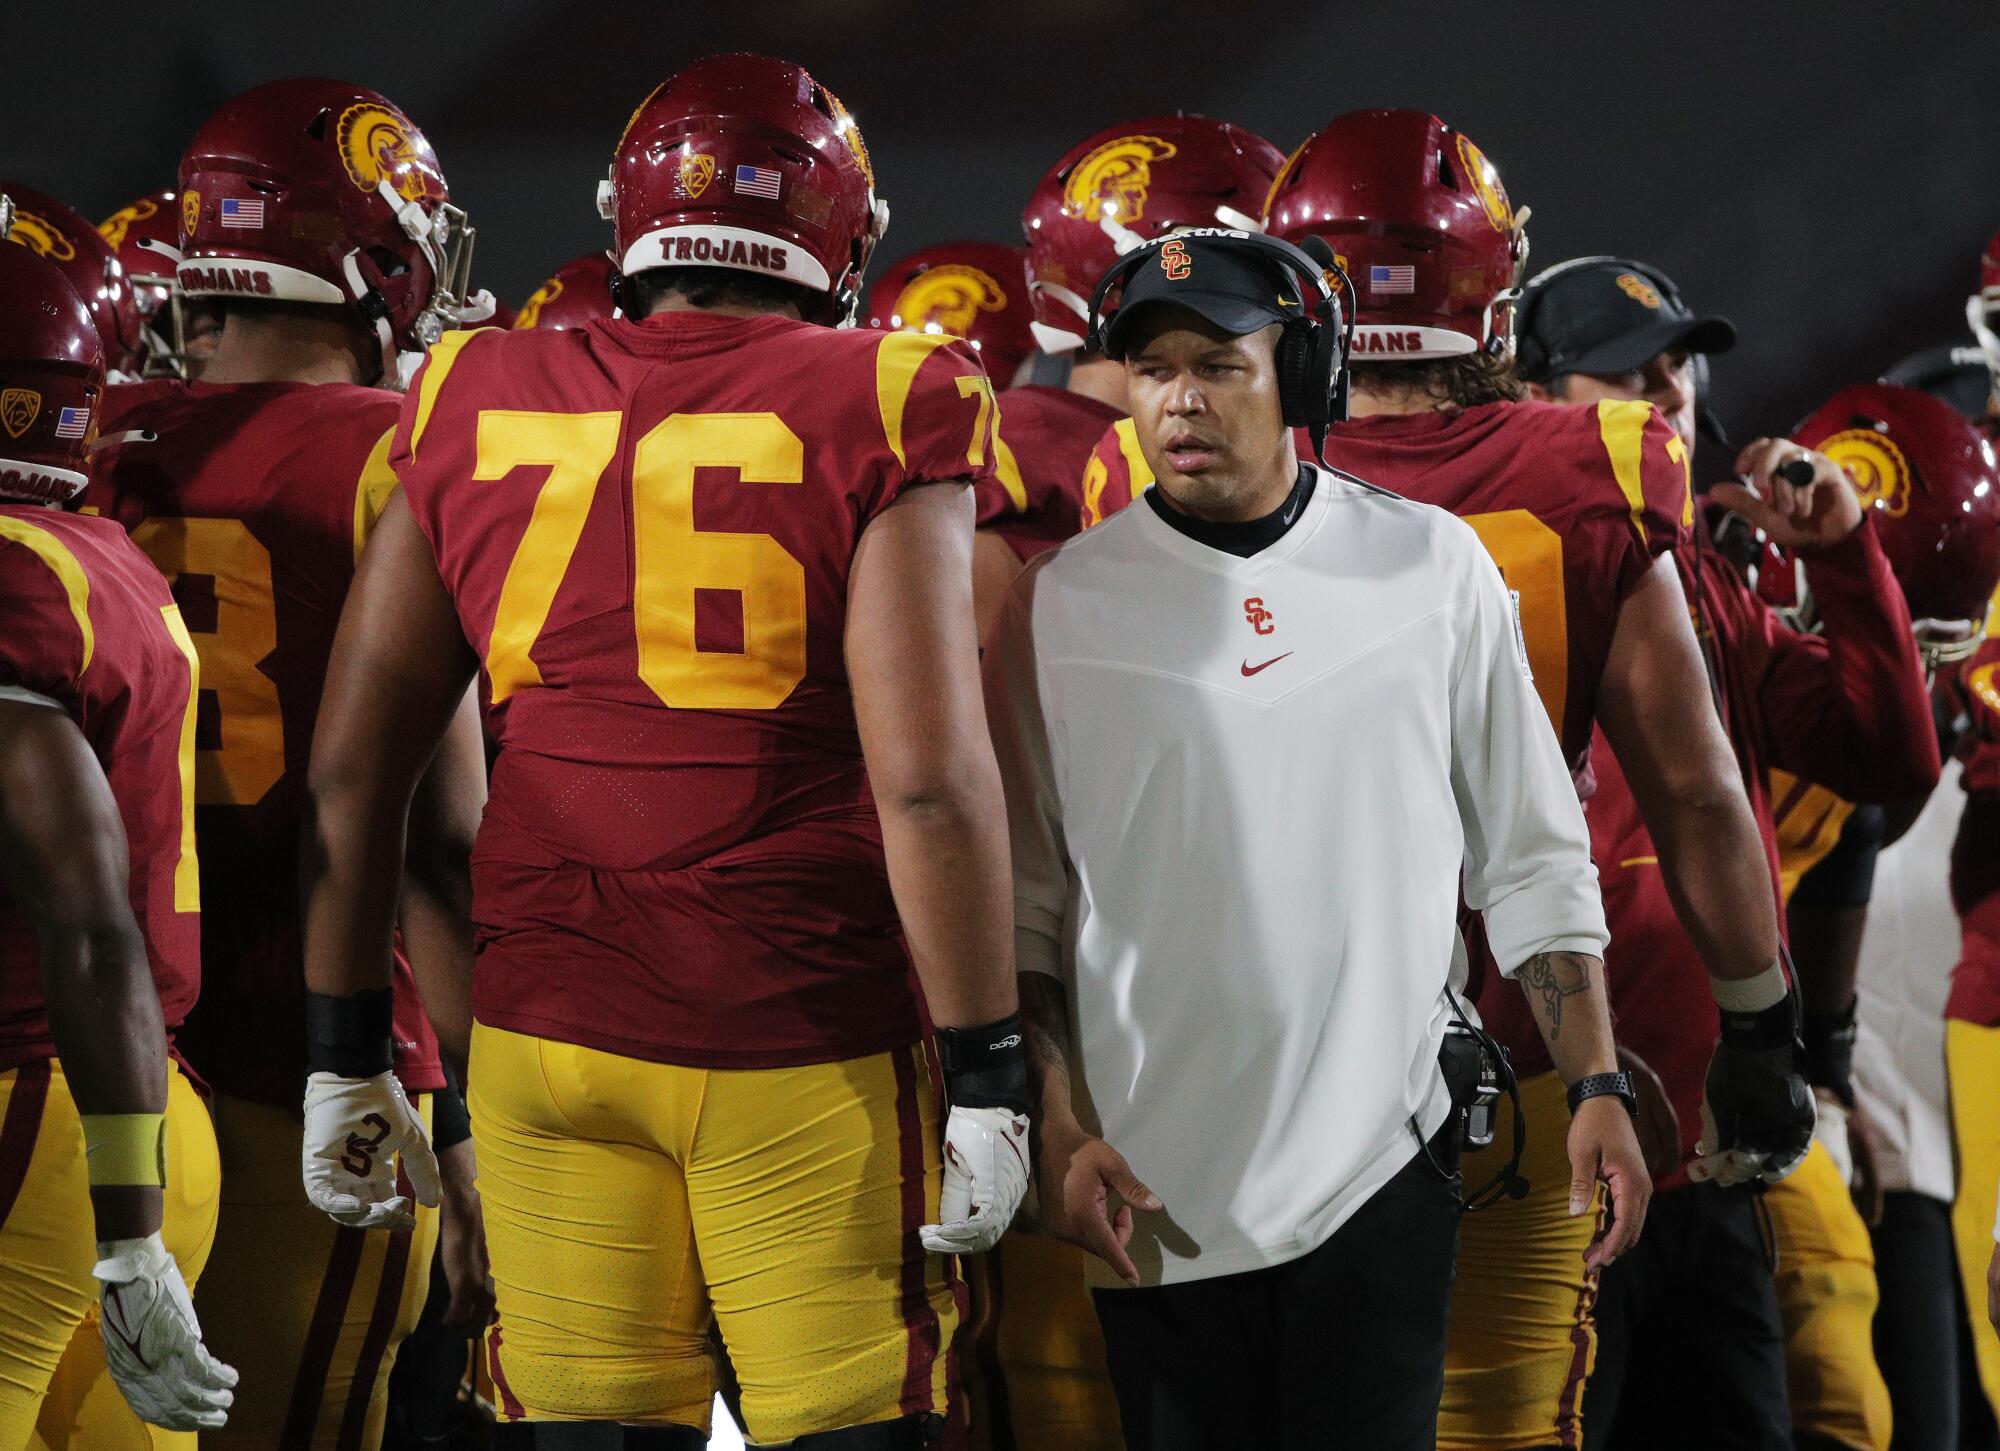 USC interim head coach Donte Williams looks on from the sideline in the closing moments of the Trojans' 45-27 loss.